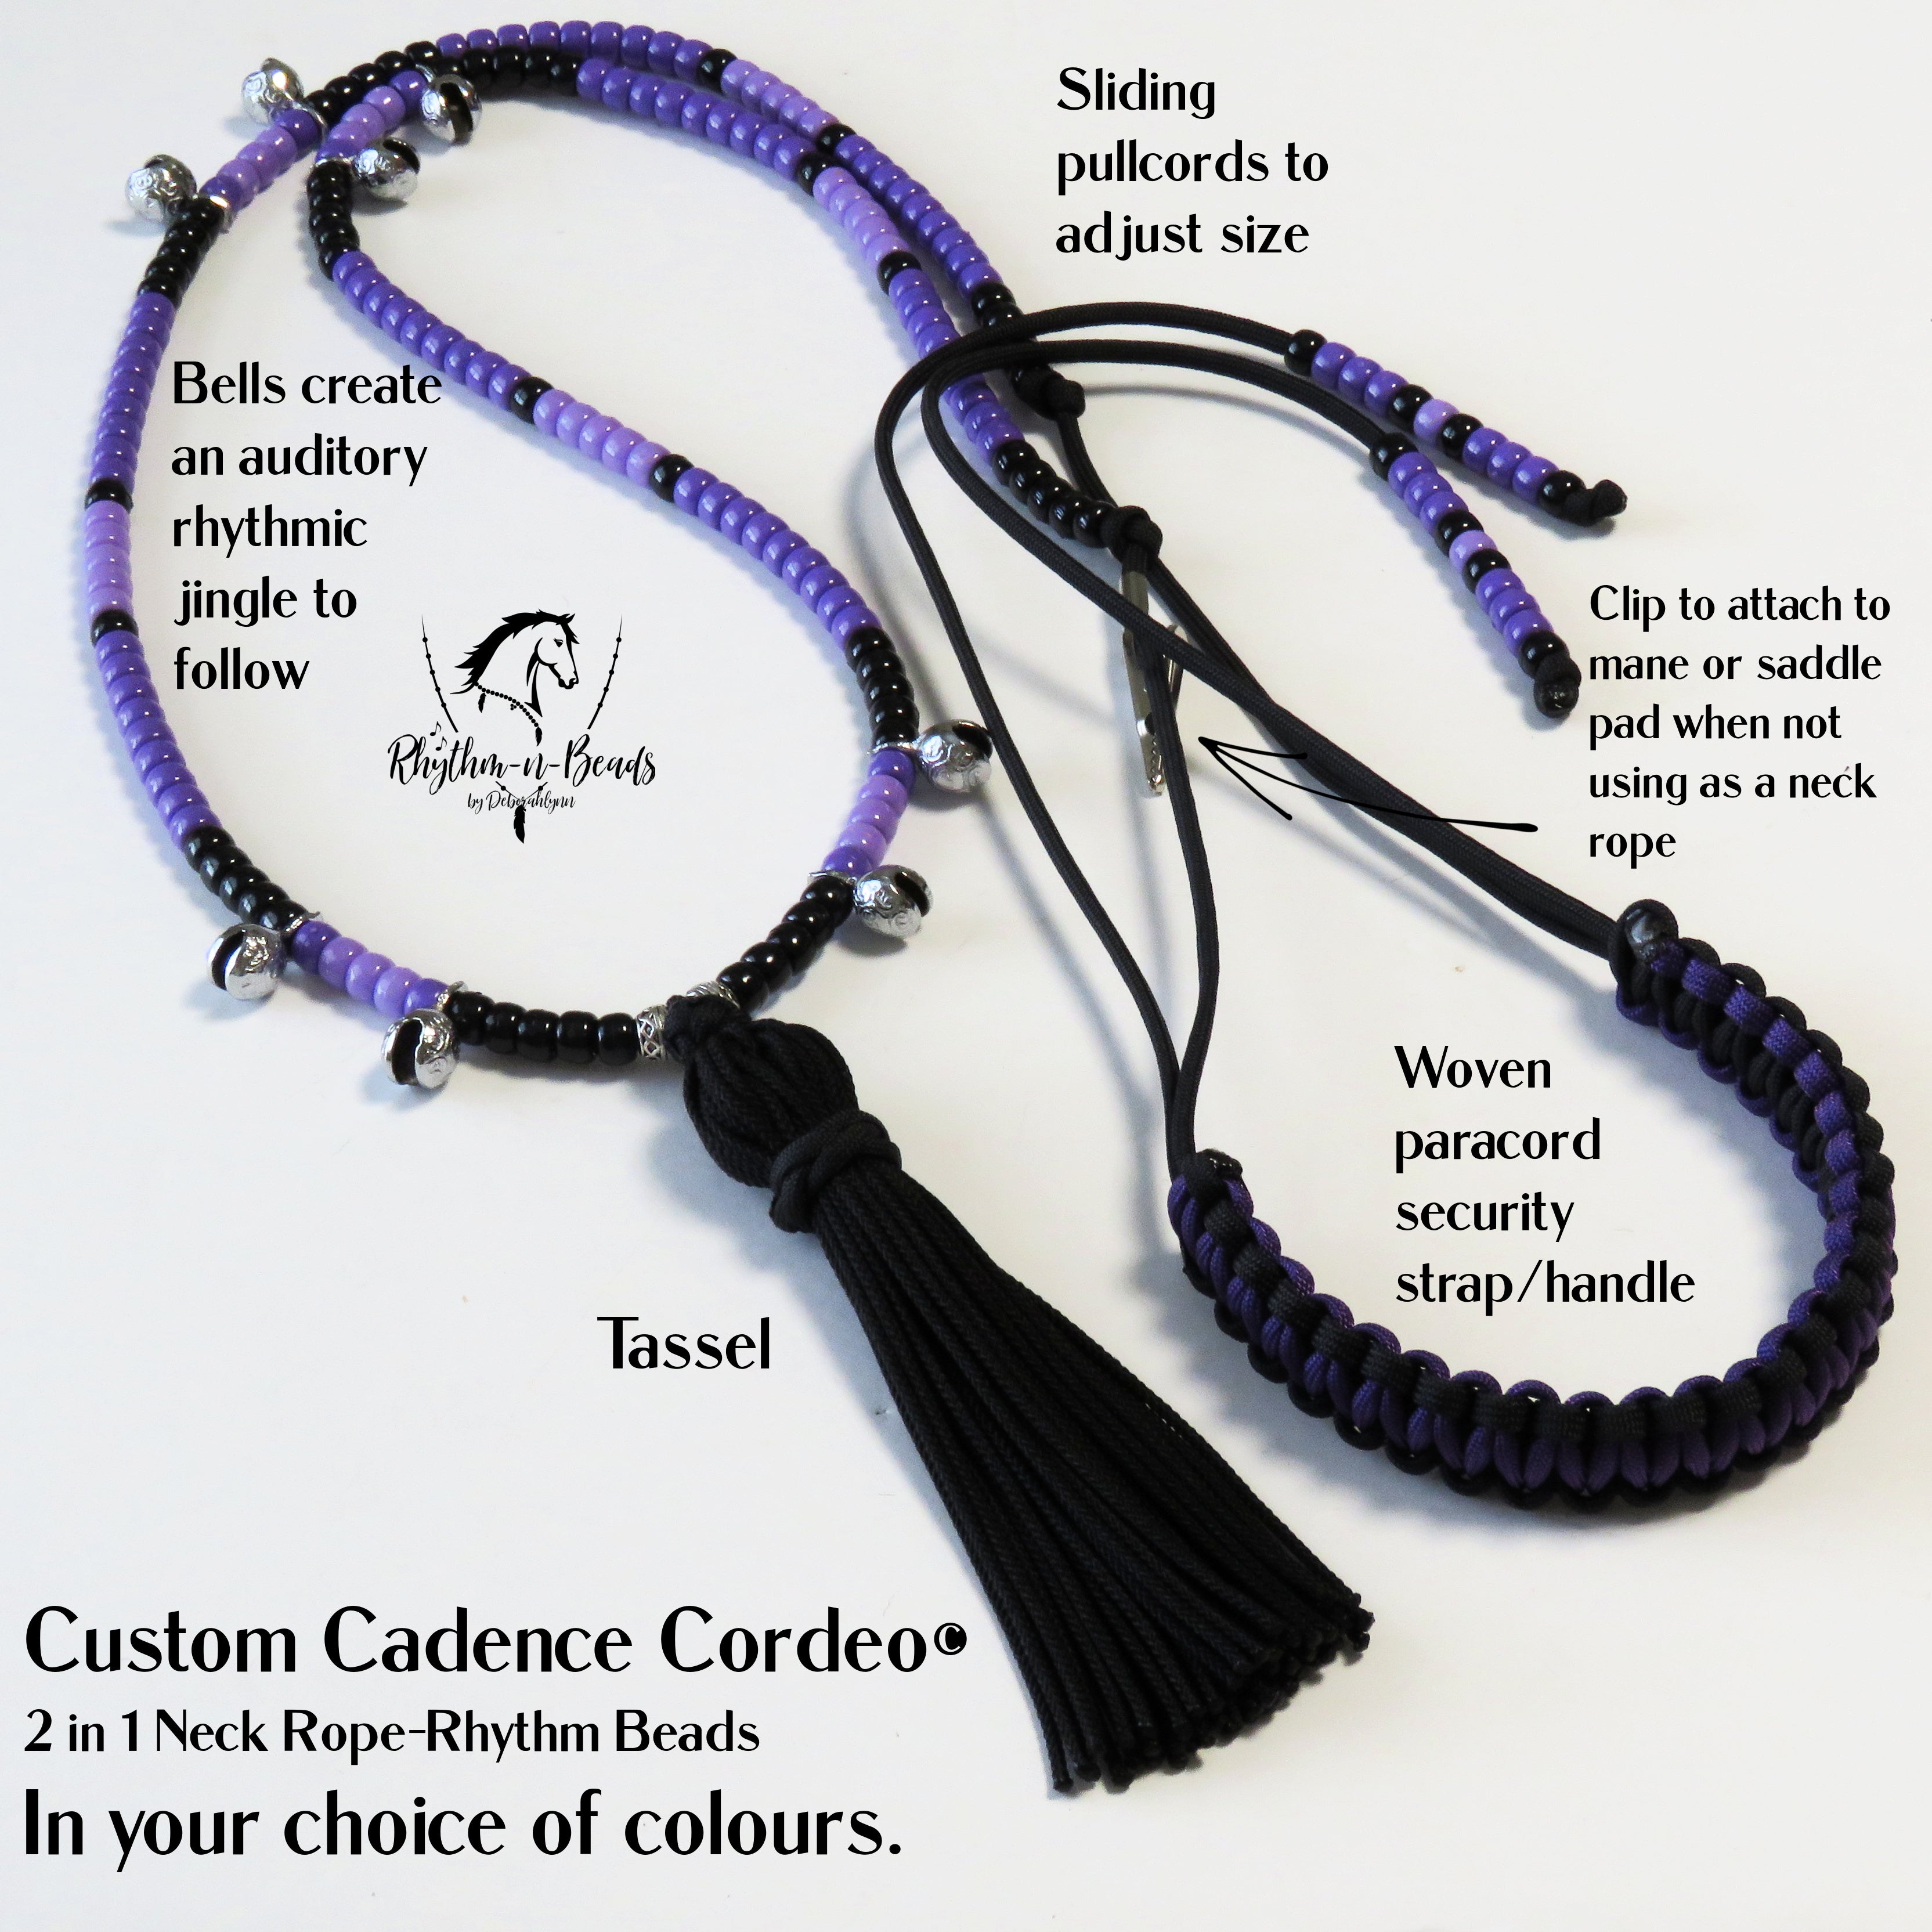 2 in 1 Cadence Cordeo© Neck Rope-Rhythm Bead Necklace with Tassel -CUSTOM COLOURS